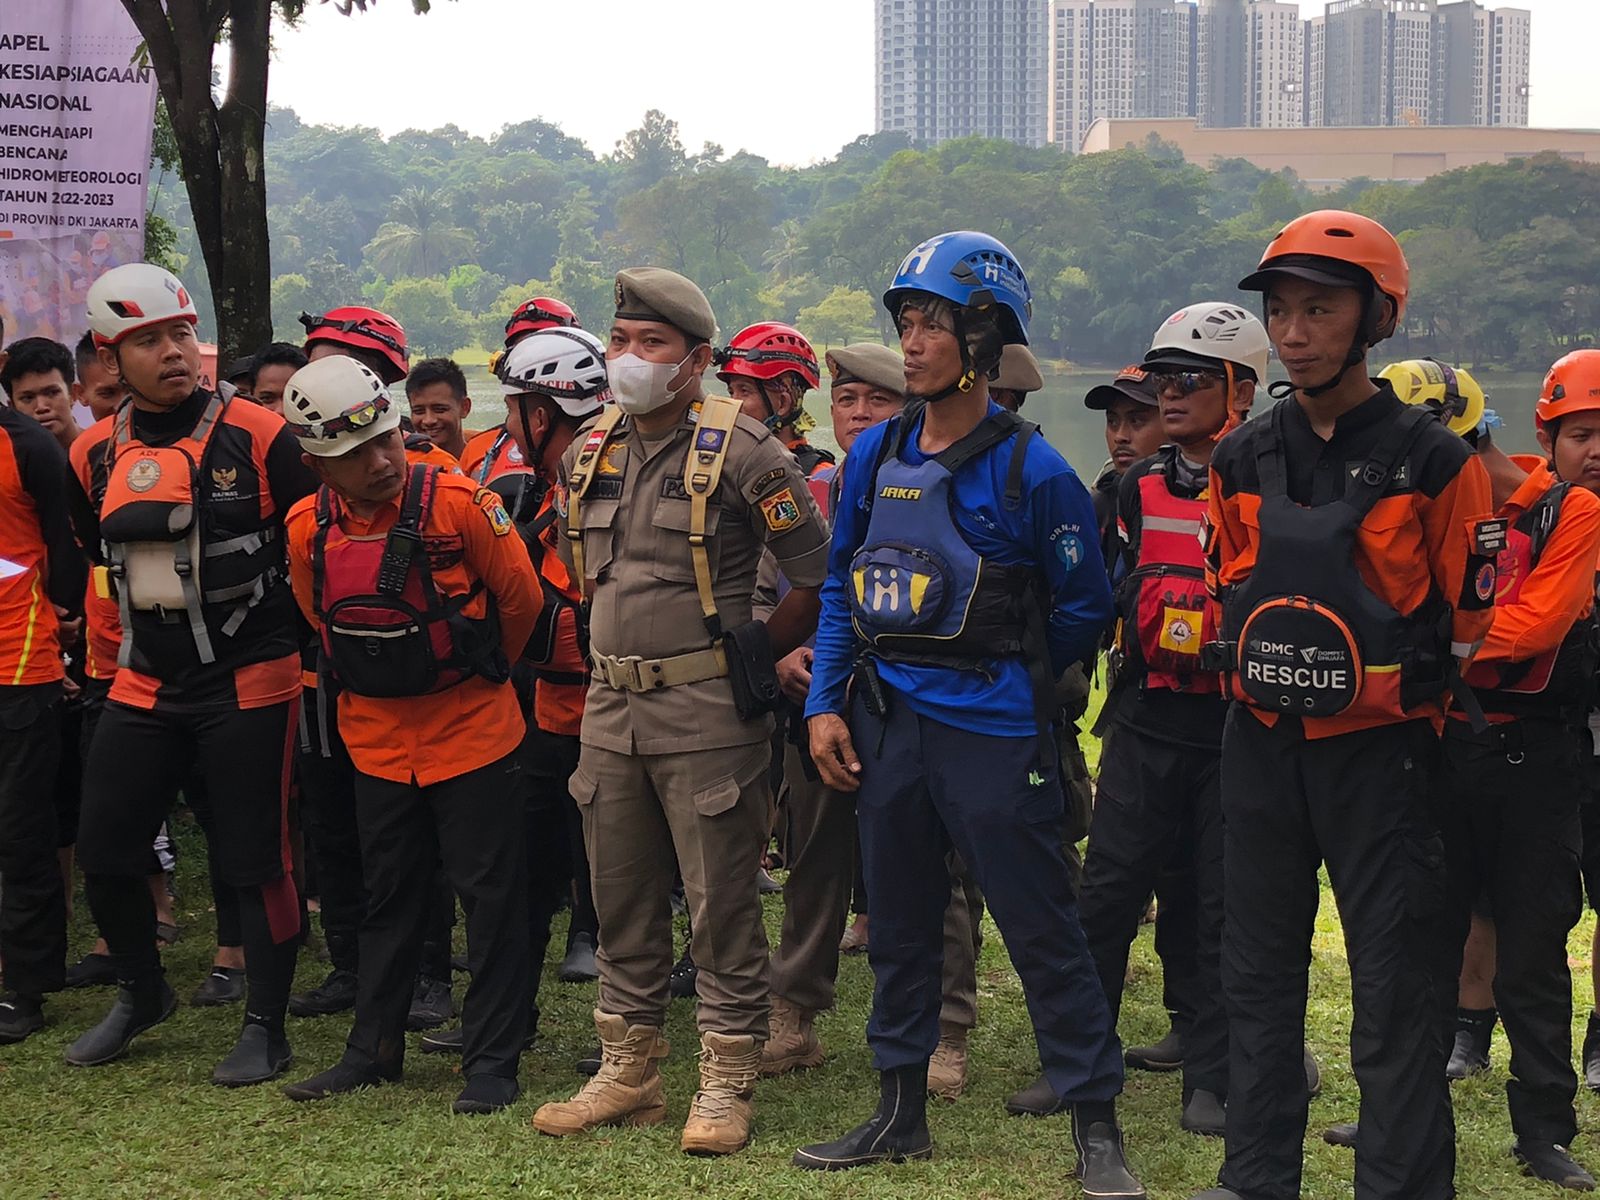 National Preparedness App, Human Initiative Plays Active Role in Water Rescue Simulation